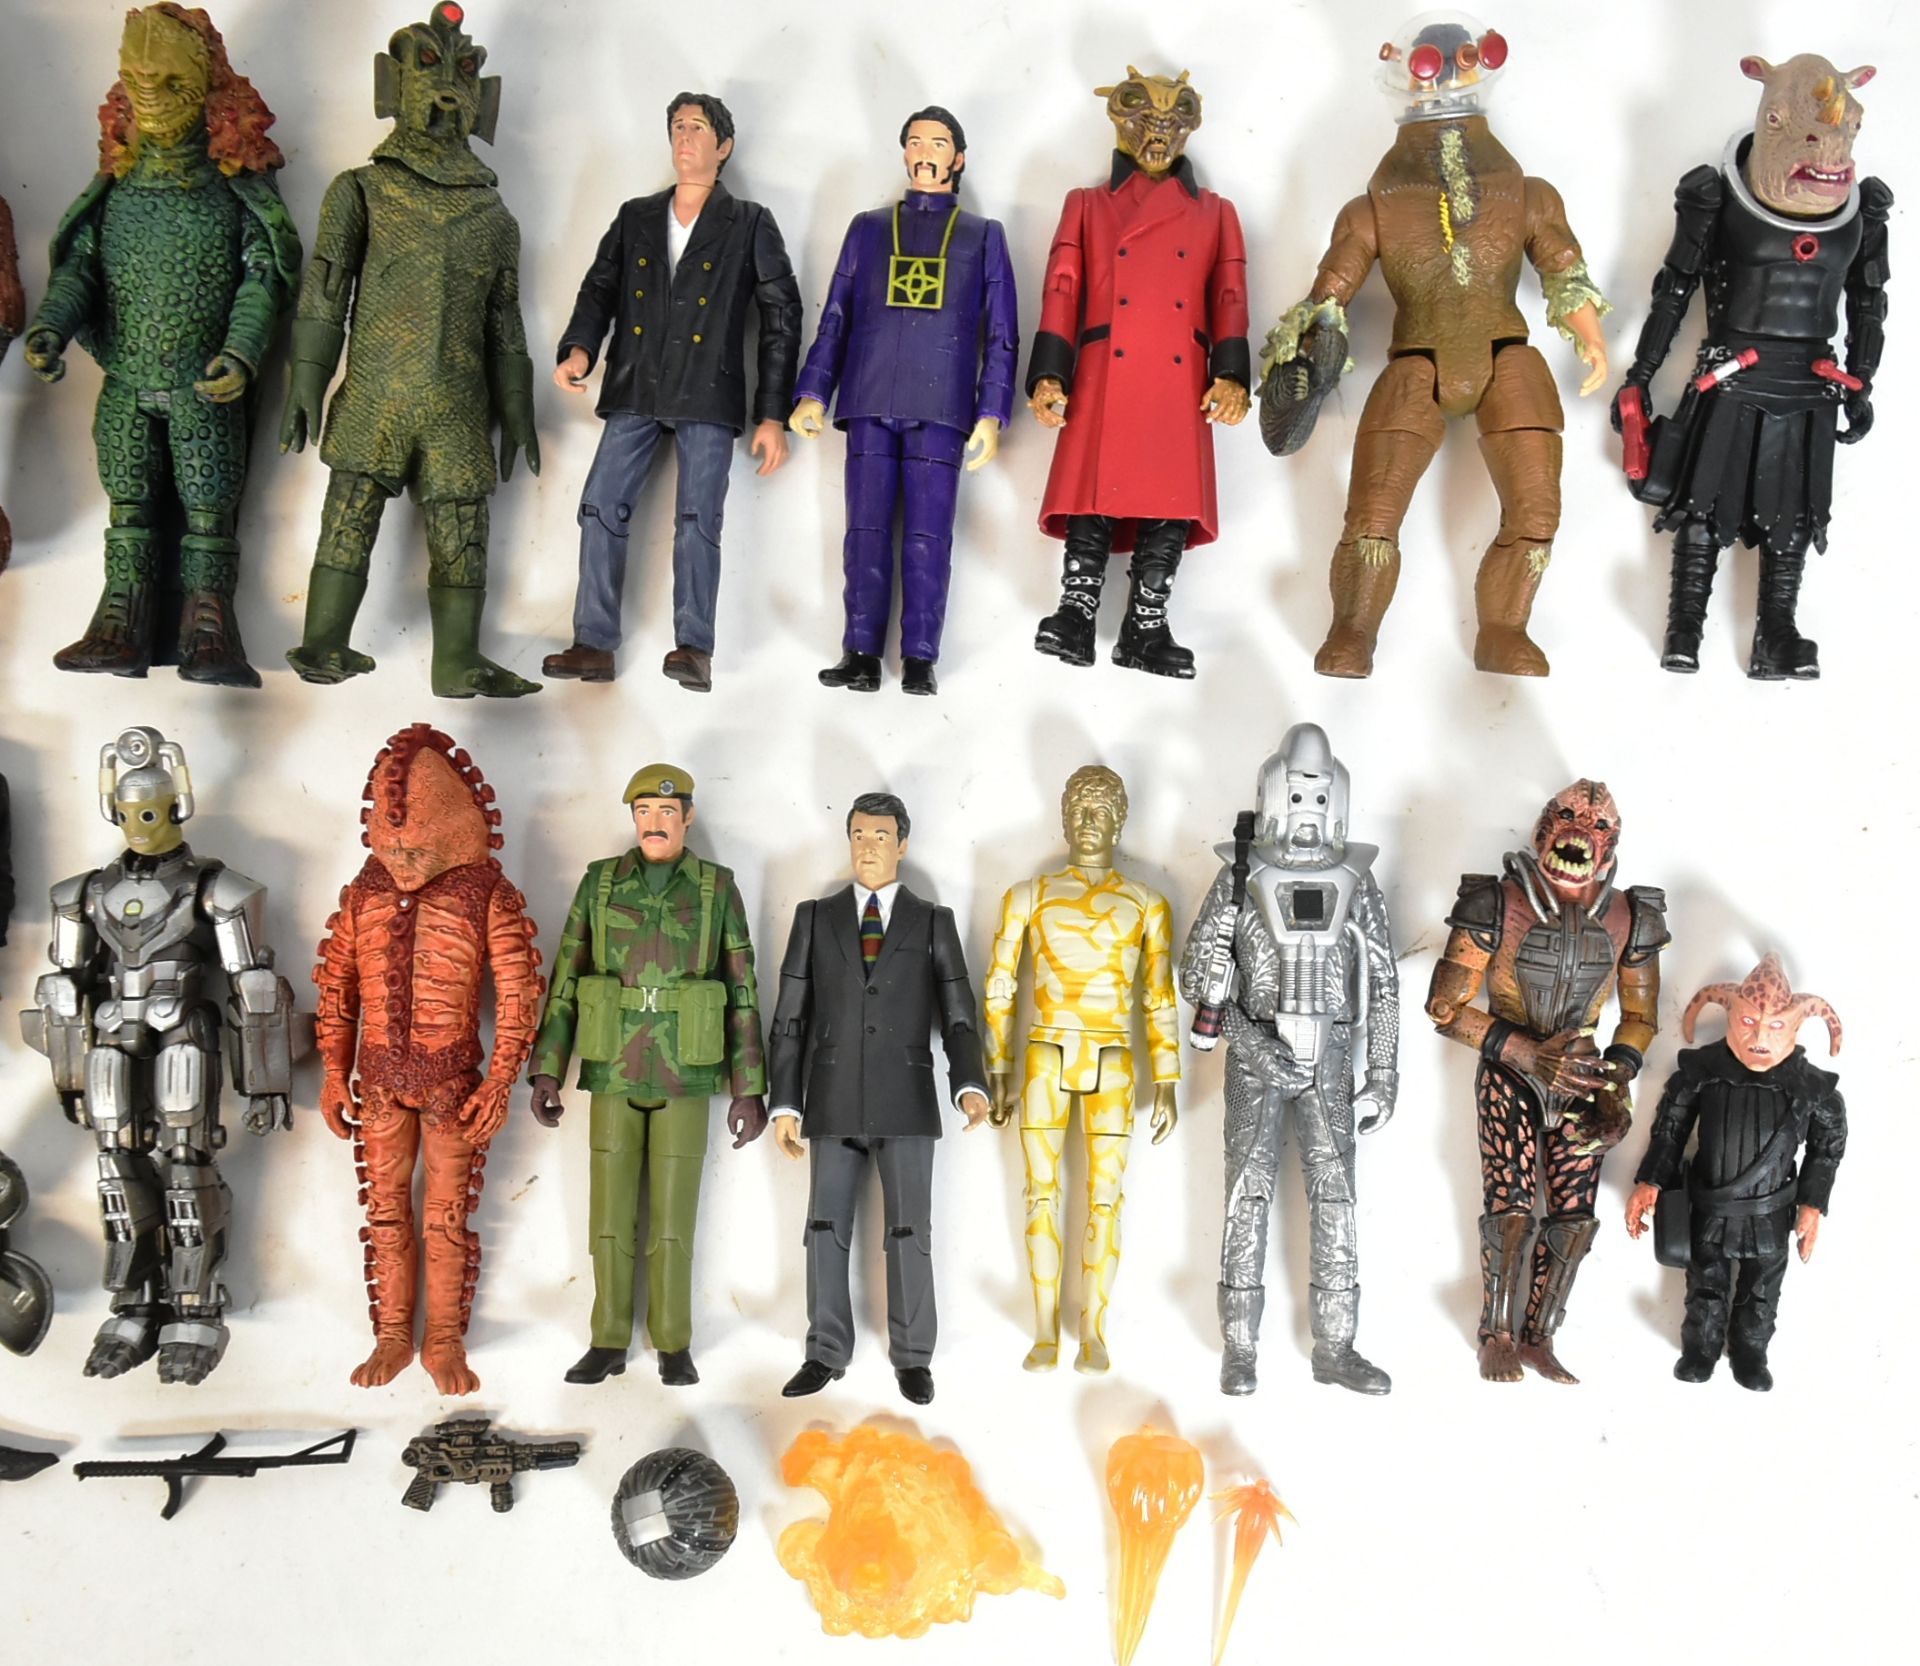 DOCTOR WHO - ACTION FIGURES - 'NEW WHO' & CLASSIC WHO - Image 3 of 5